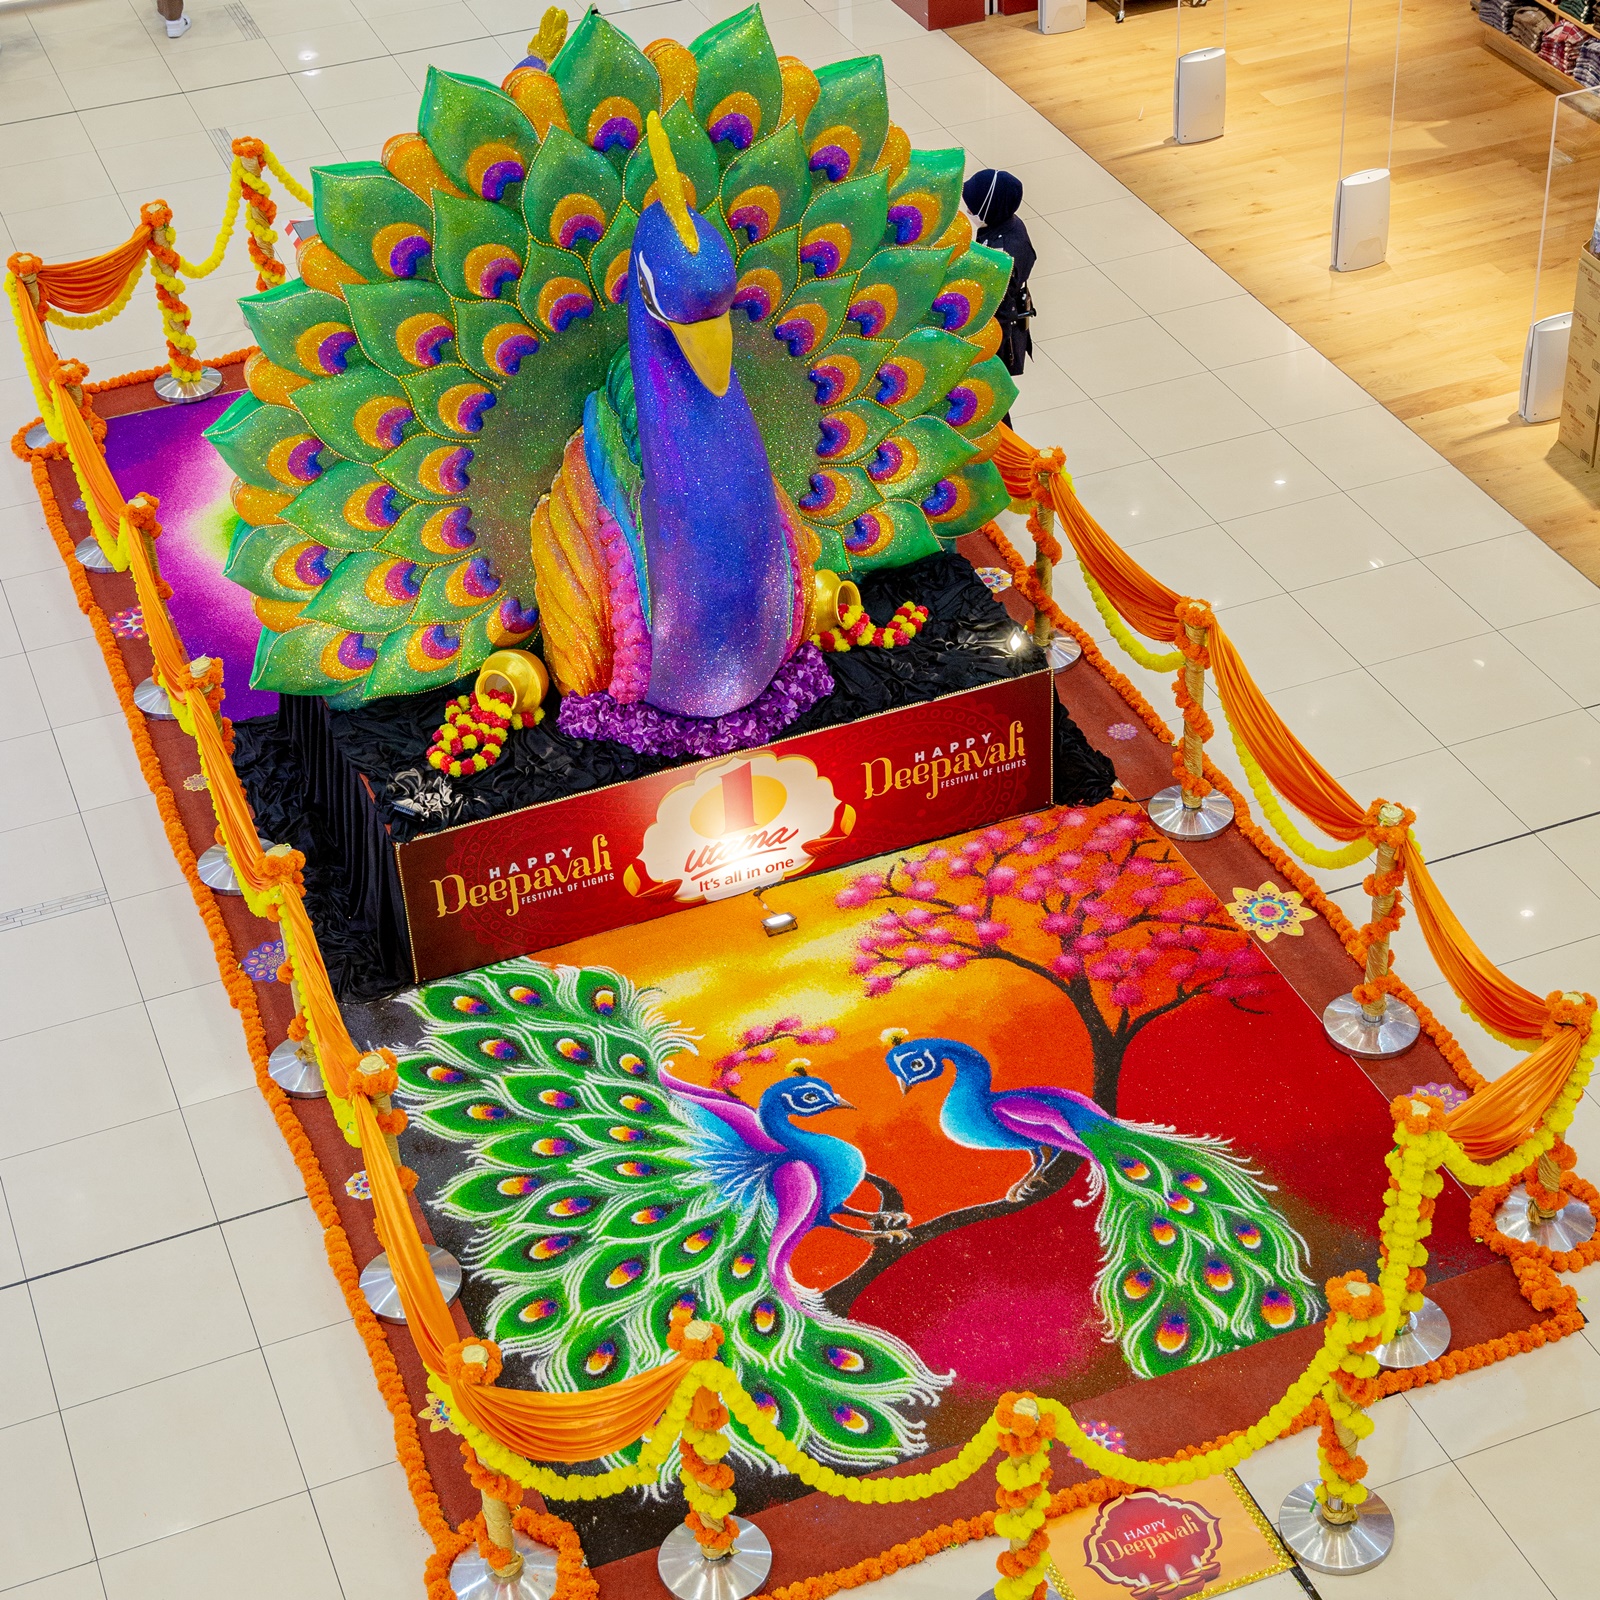 Kolam decoration in a shopping mall